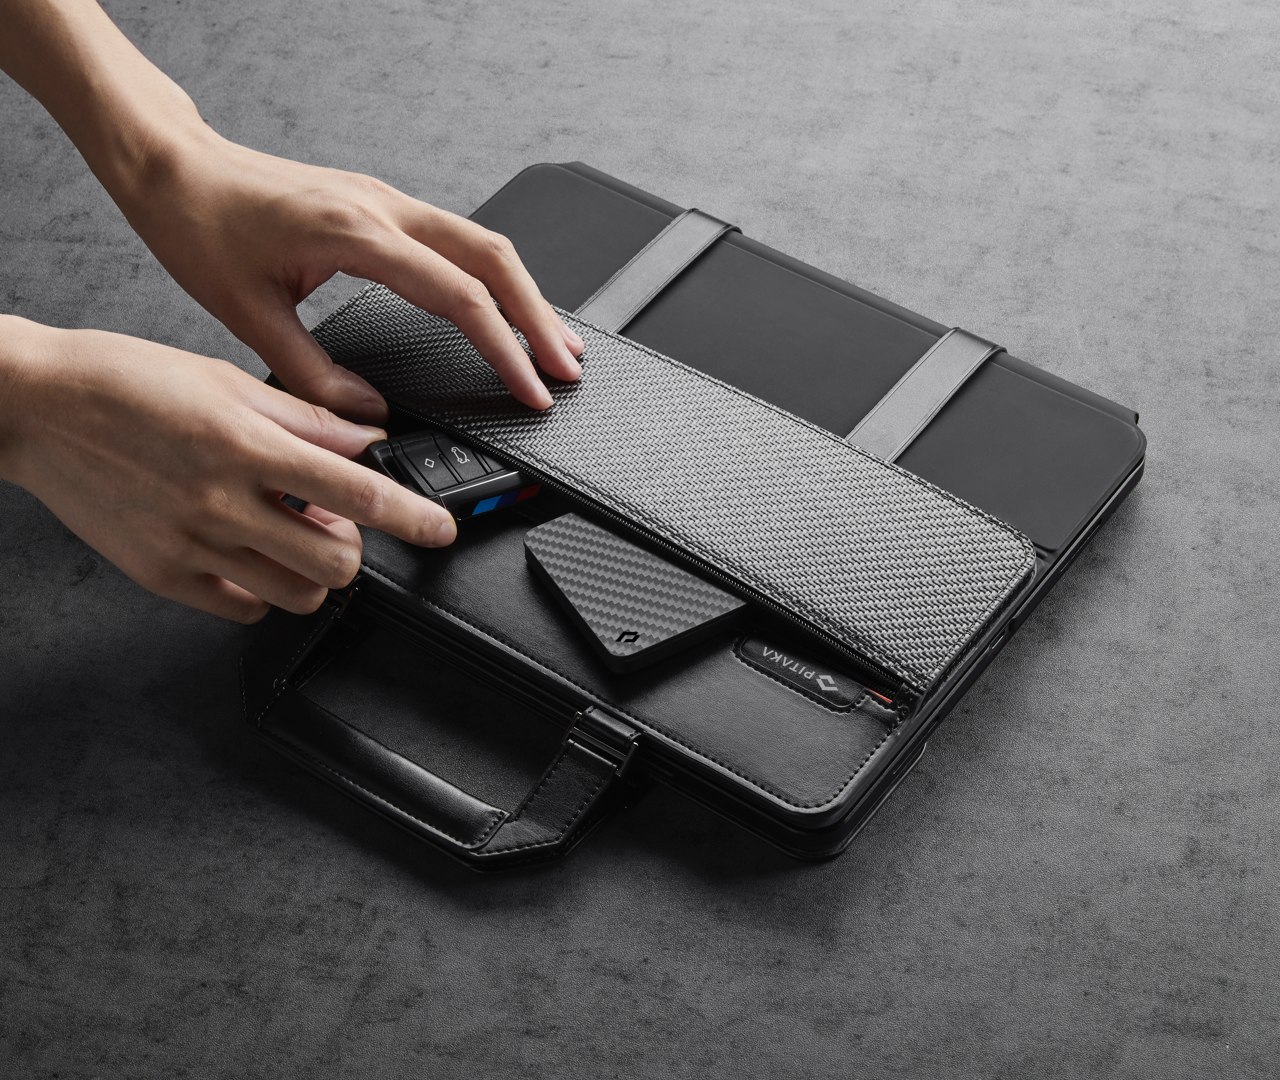 The new iPad case from PITAKA comes with a smart zipperless design that allows you to set up your workstation for 1 second